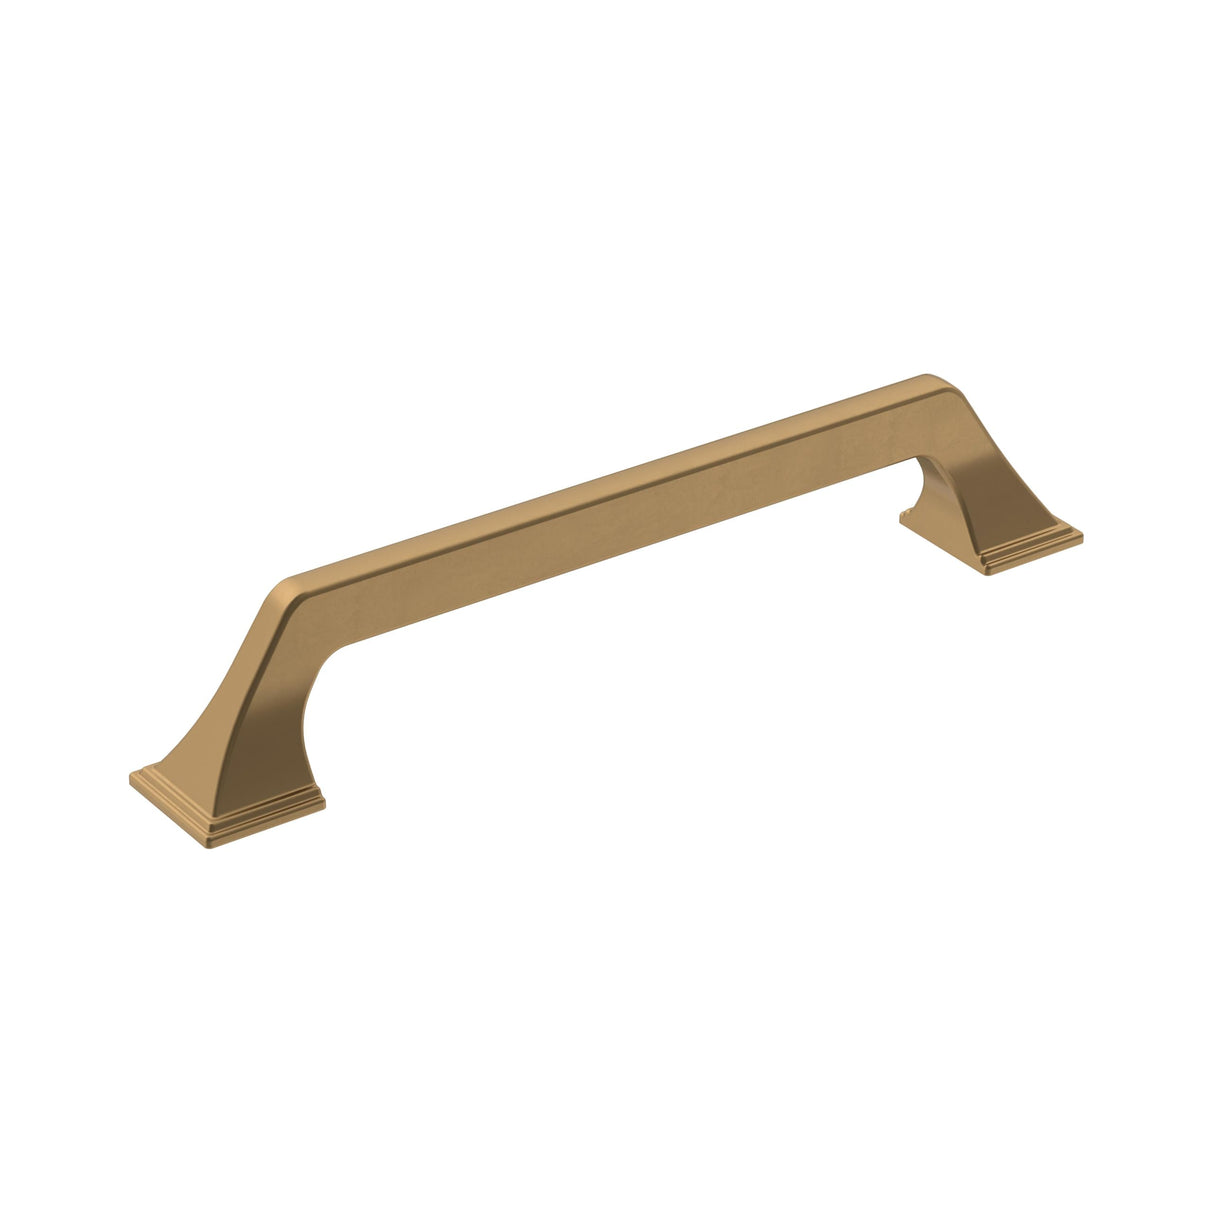 Amerock Cabinet Pull Champagne Bronze 6-5/16 inch (160 mm) Center-to-Center Exceed 1 Pack Drawer Pull Cabinet Handle Cabinet Hardware